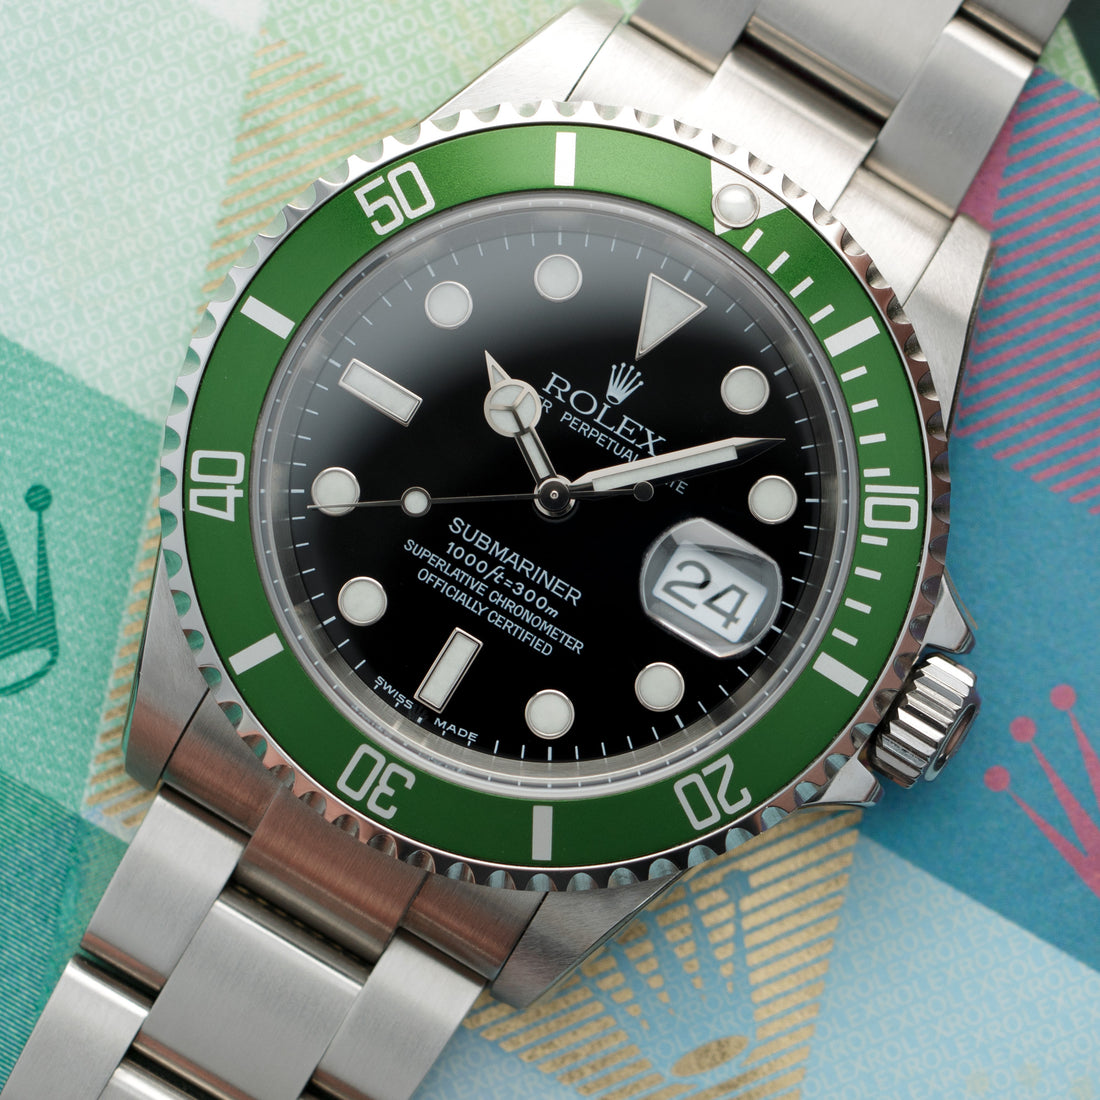 Rolex Anniversary Flat Four Submariner Ref. 16610, with Original Box and Papers New Old Stock